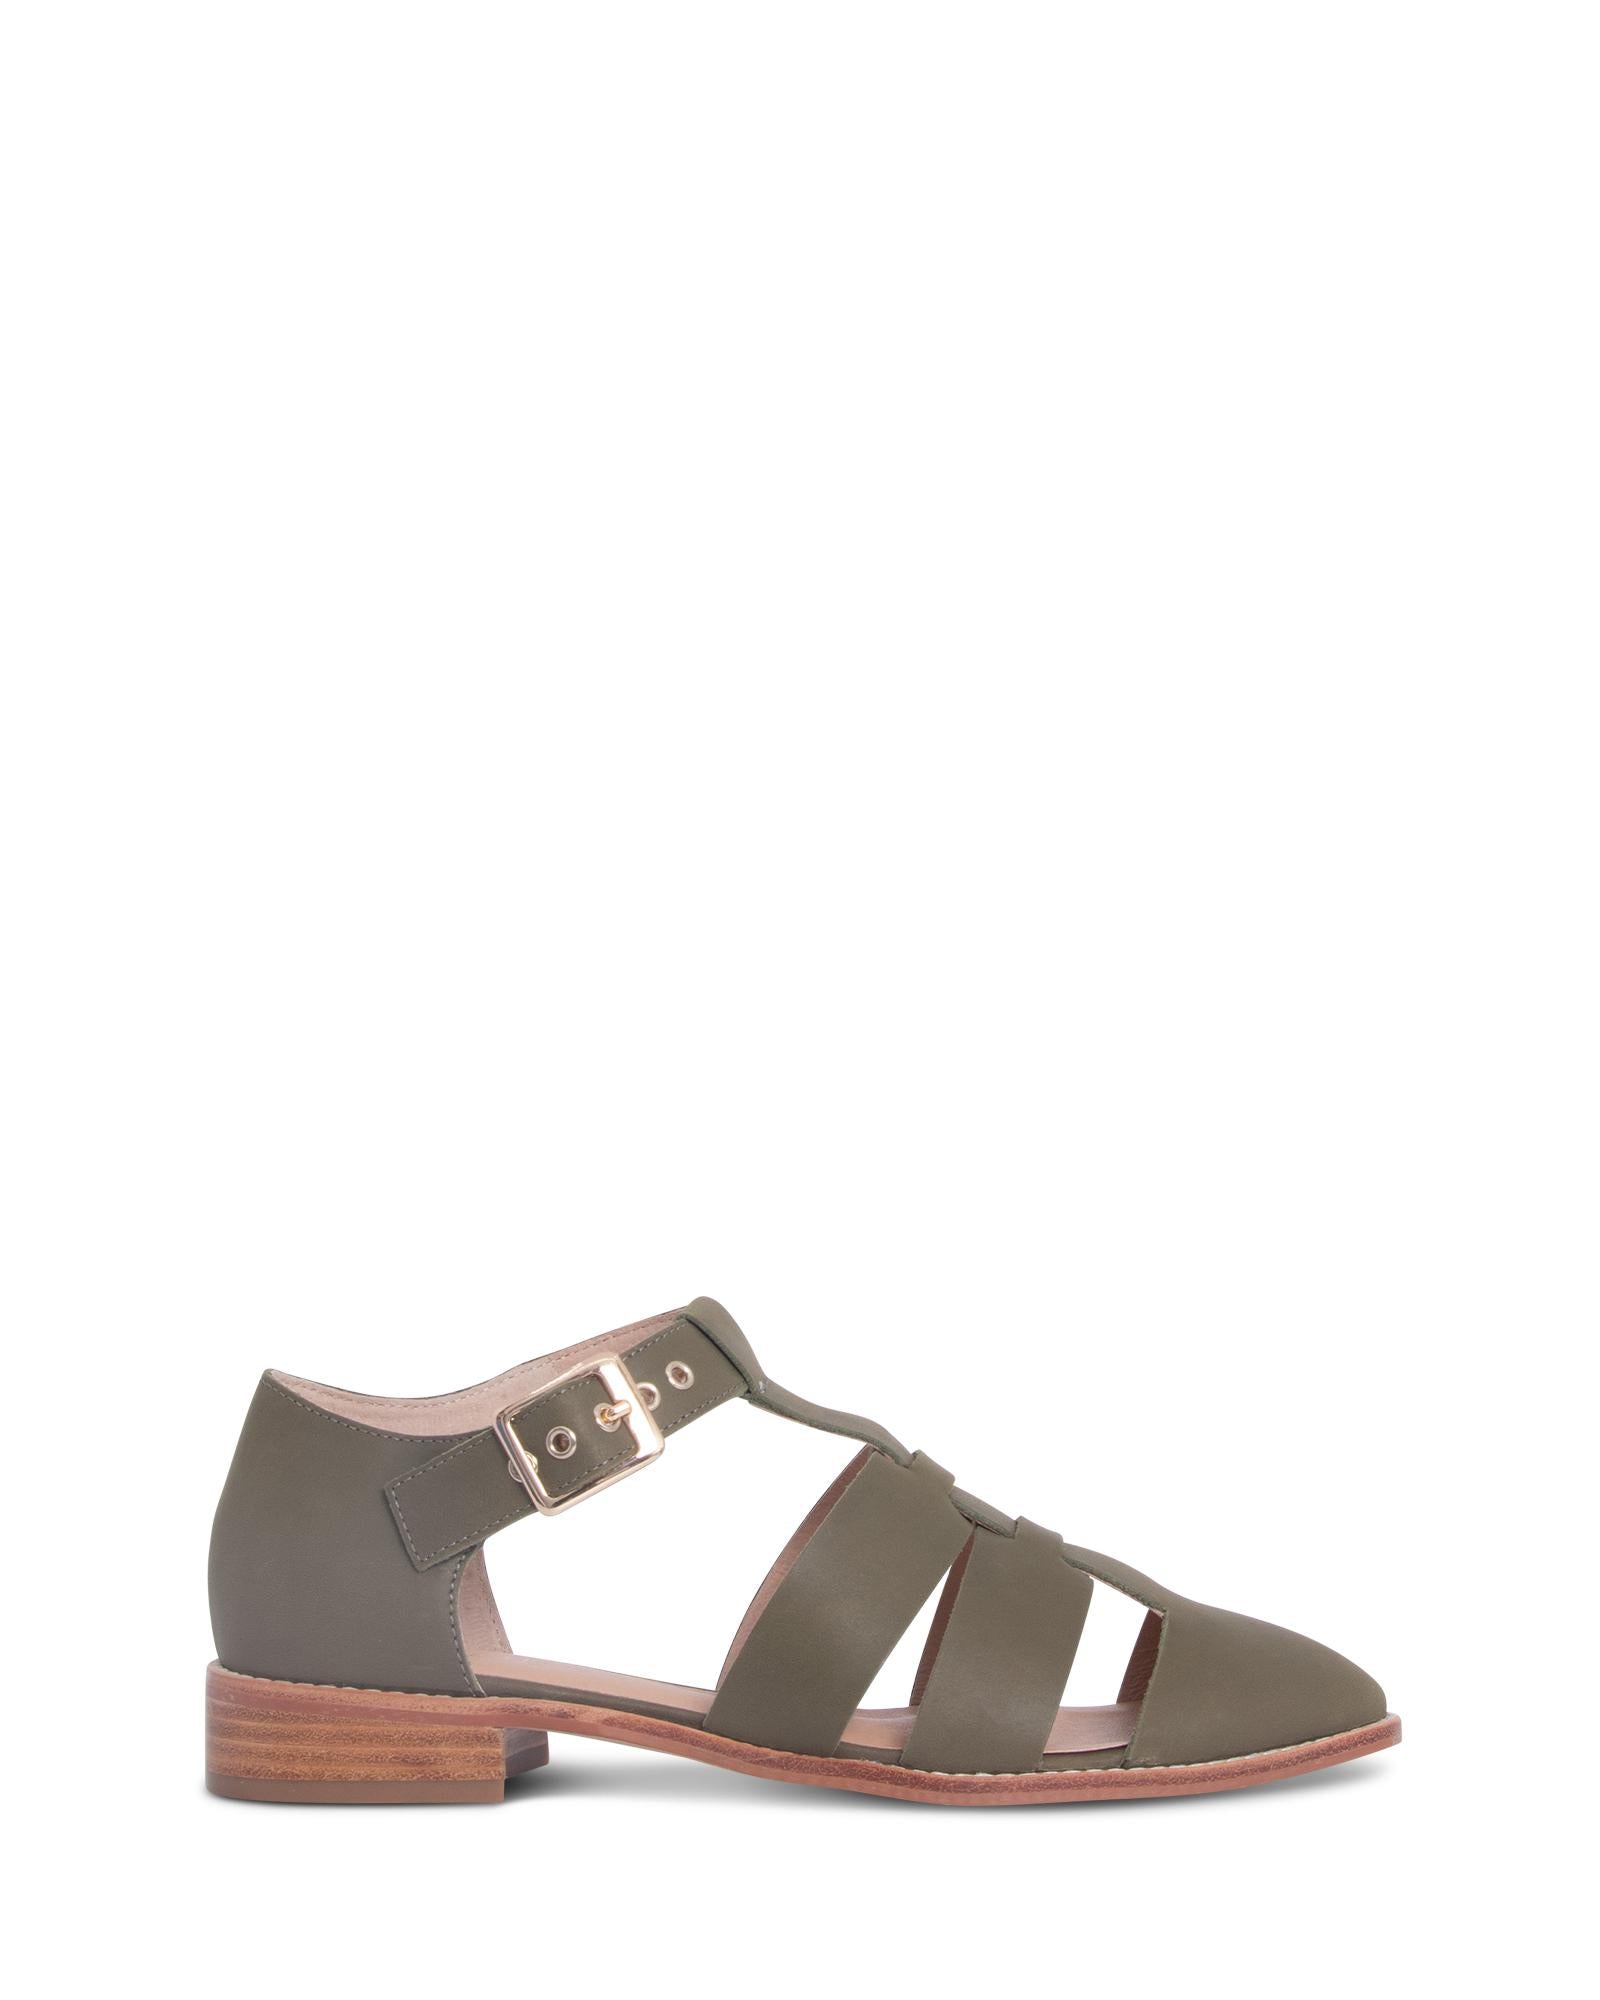 Cecilia Khaki 2.5cm Sandal with Almond Toe and Adjustable Ankle Strap